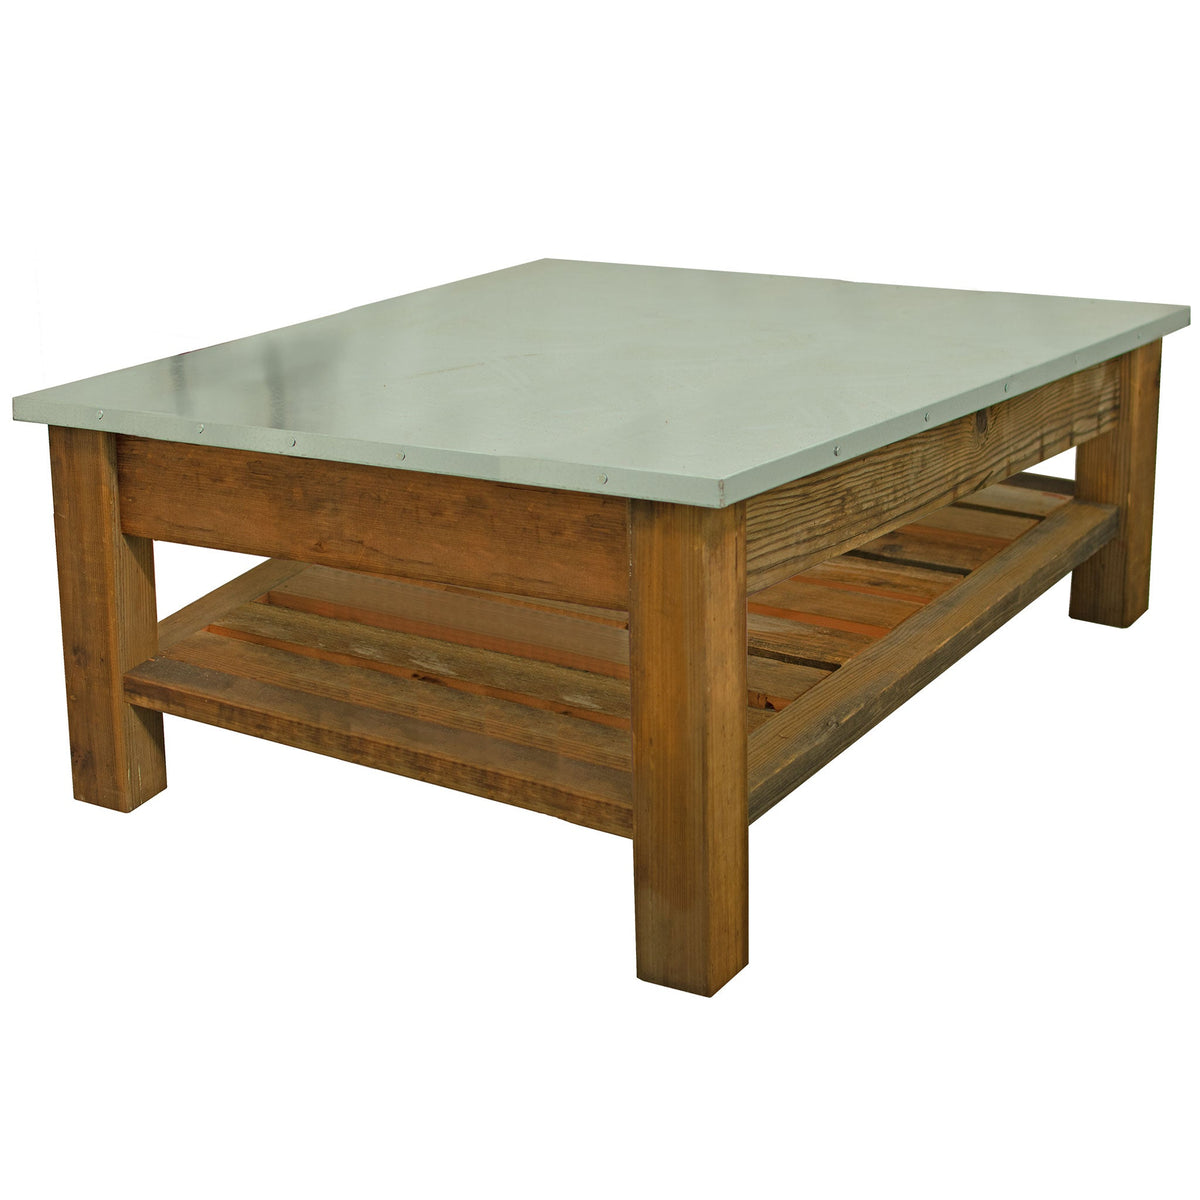 Redwood Outdoor Patio Coffee Table on sale at Lee Display